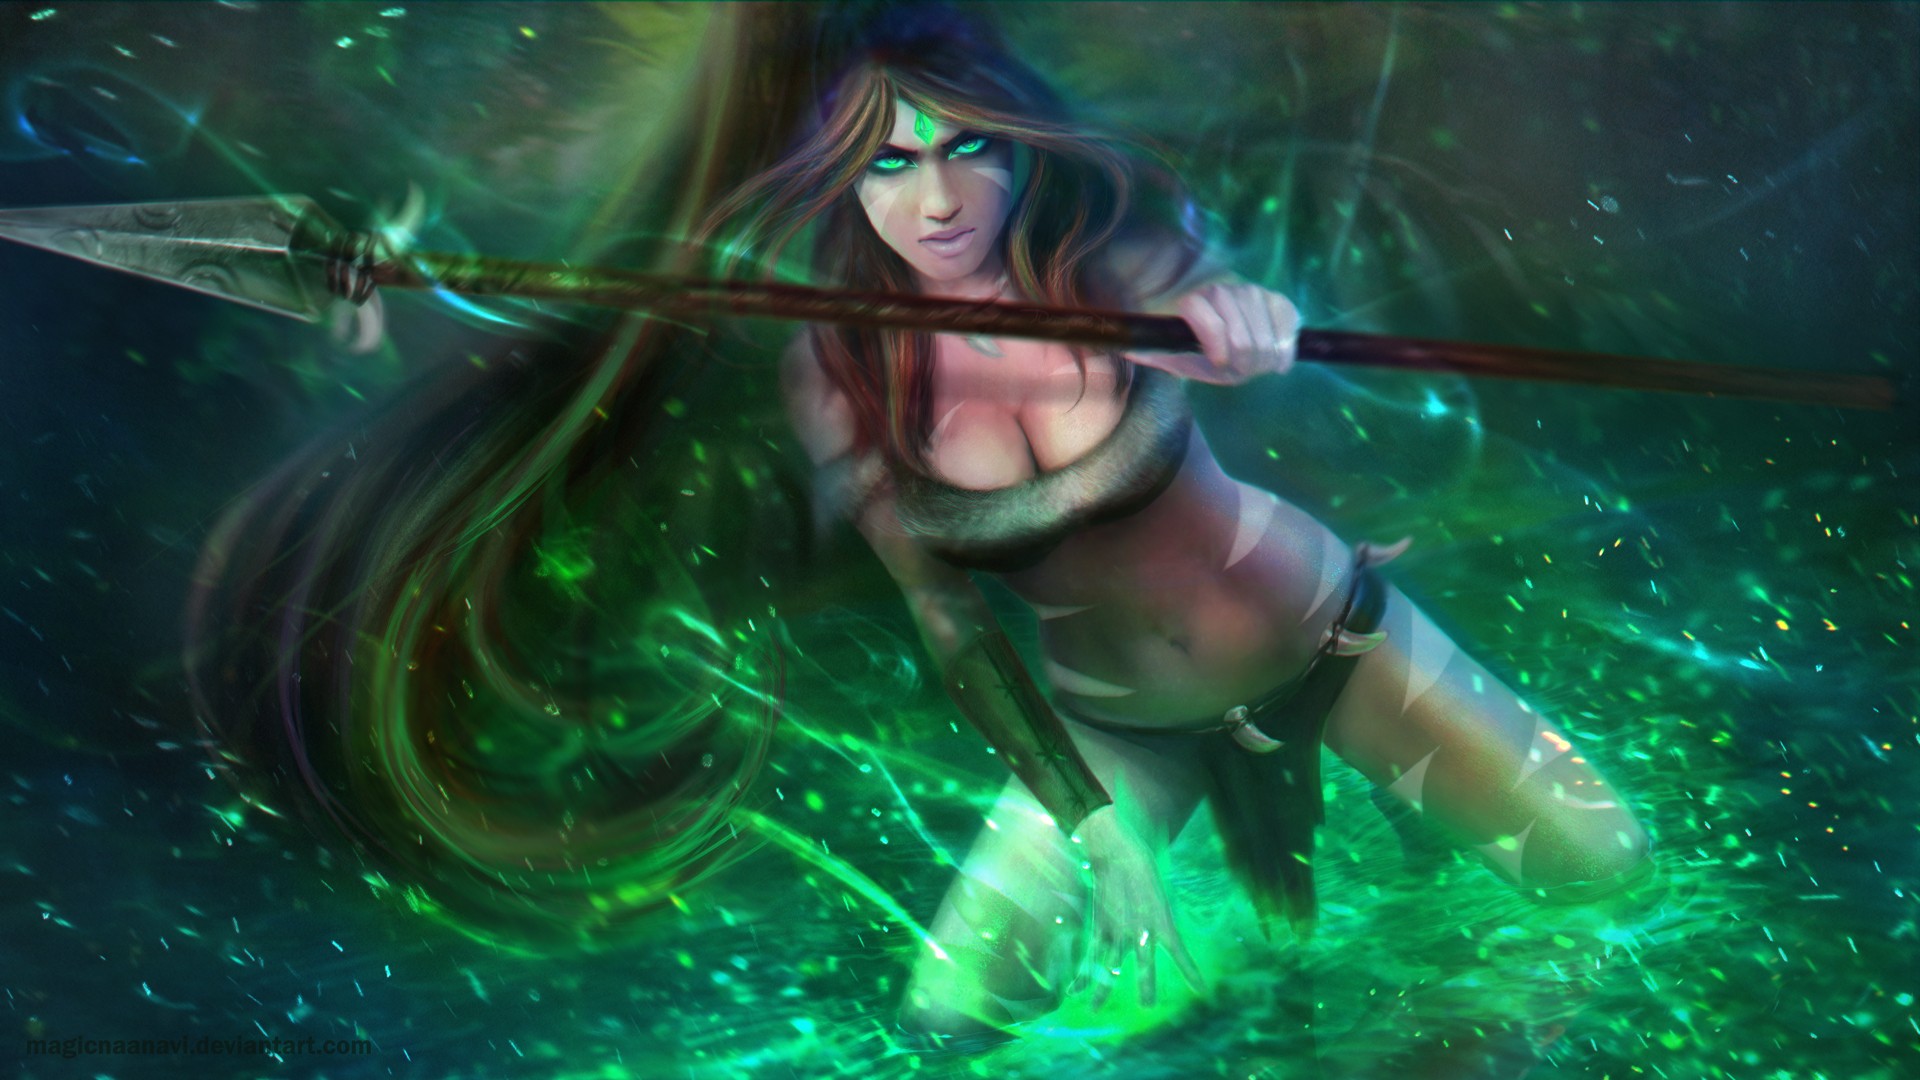 Anime Girls Anime League Of Legends Realistic Nidalee League Of Legends Riot Games MagicnaAnavi Spea 1920x1080